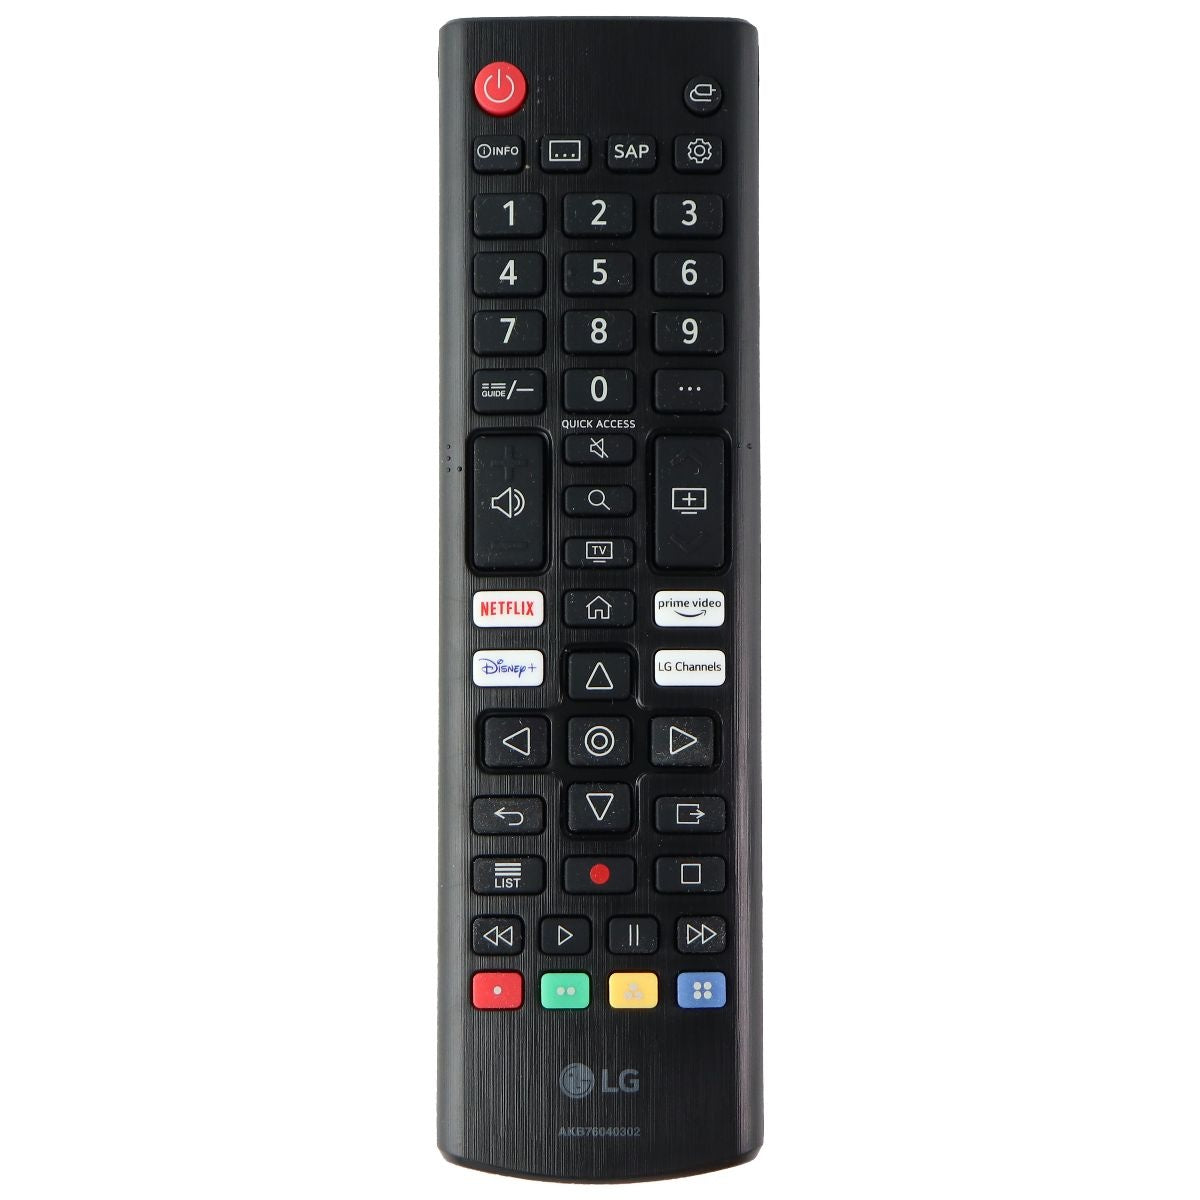 LG OEM Remote Control for Select LG TVs - Black (AKB76040302) TV, Video & Audio Accessories - Remote Controls LG    - Simple Cell Bulk Wholesale Pricing - USA Seller